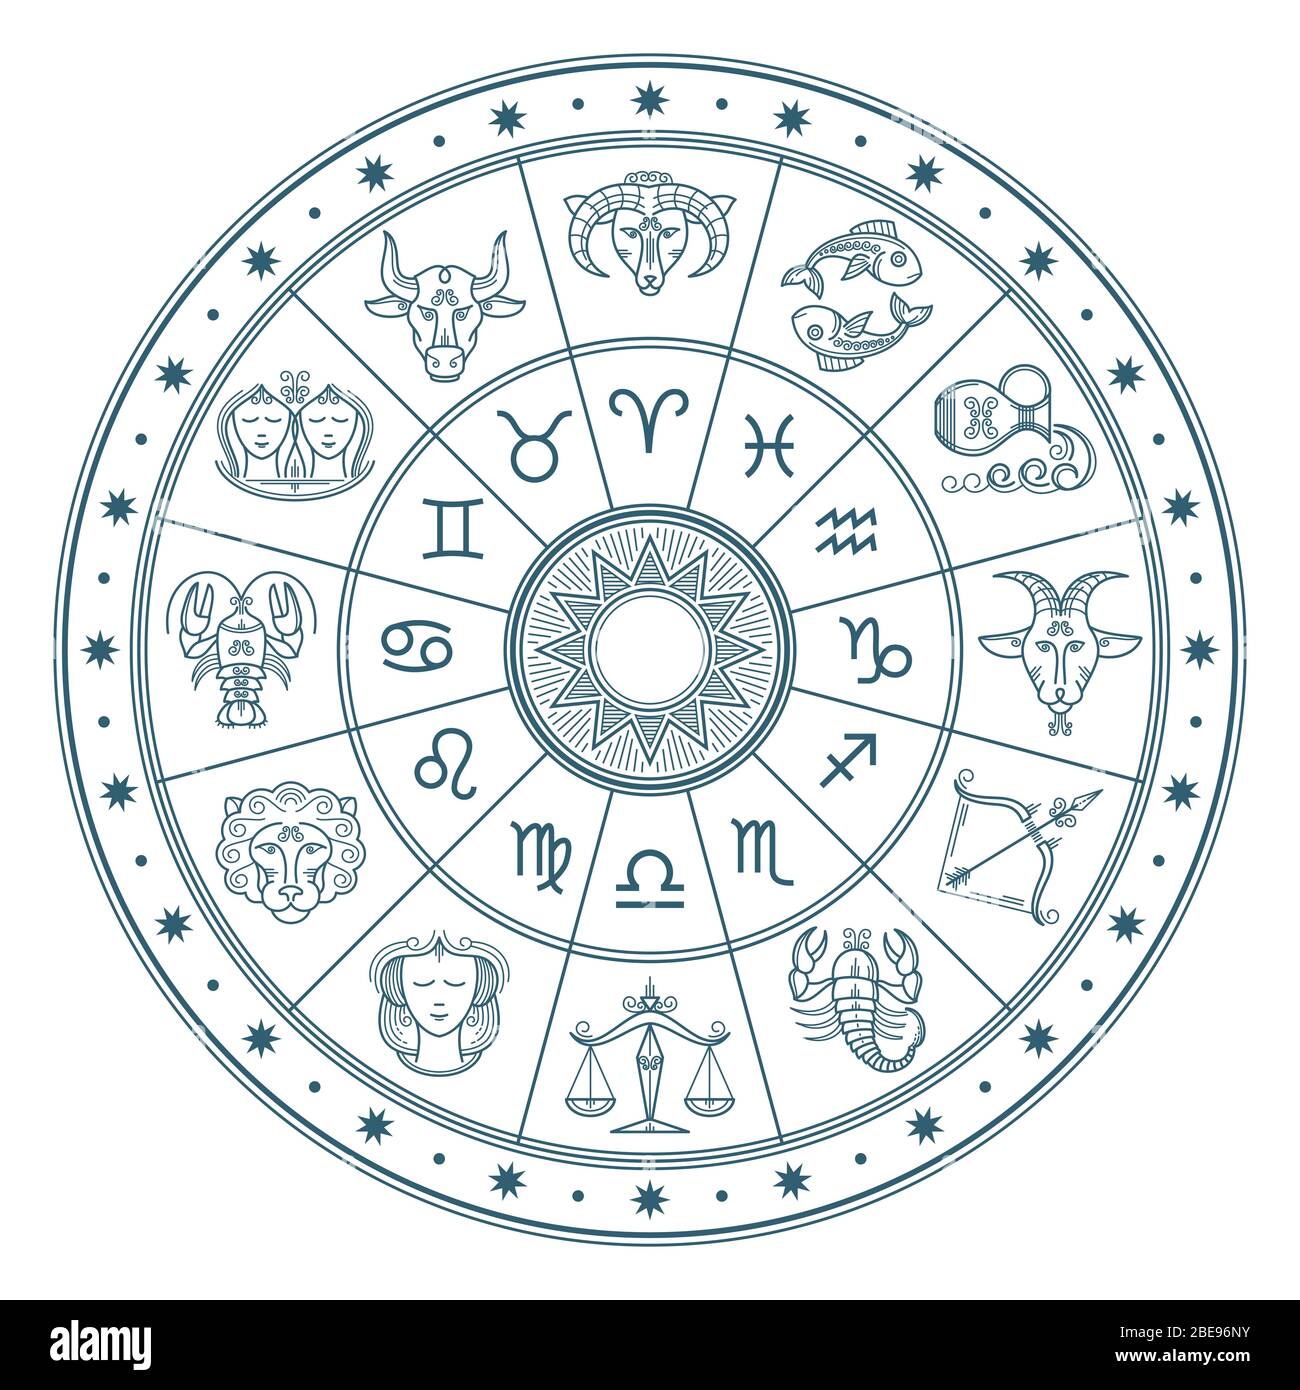 Astrology horoscope circle with zodiac signs vector background. Form symbol horoscope calendar, collection zodiacal animals illustration Stock Vector